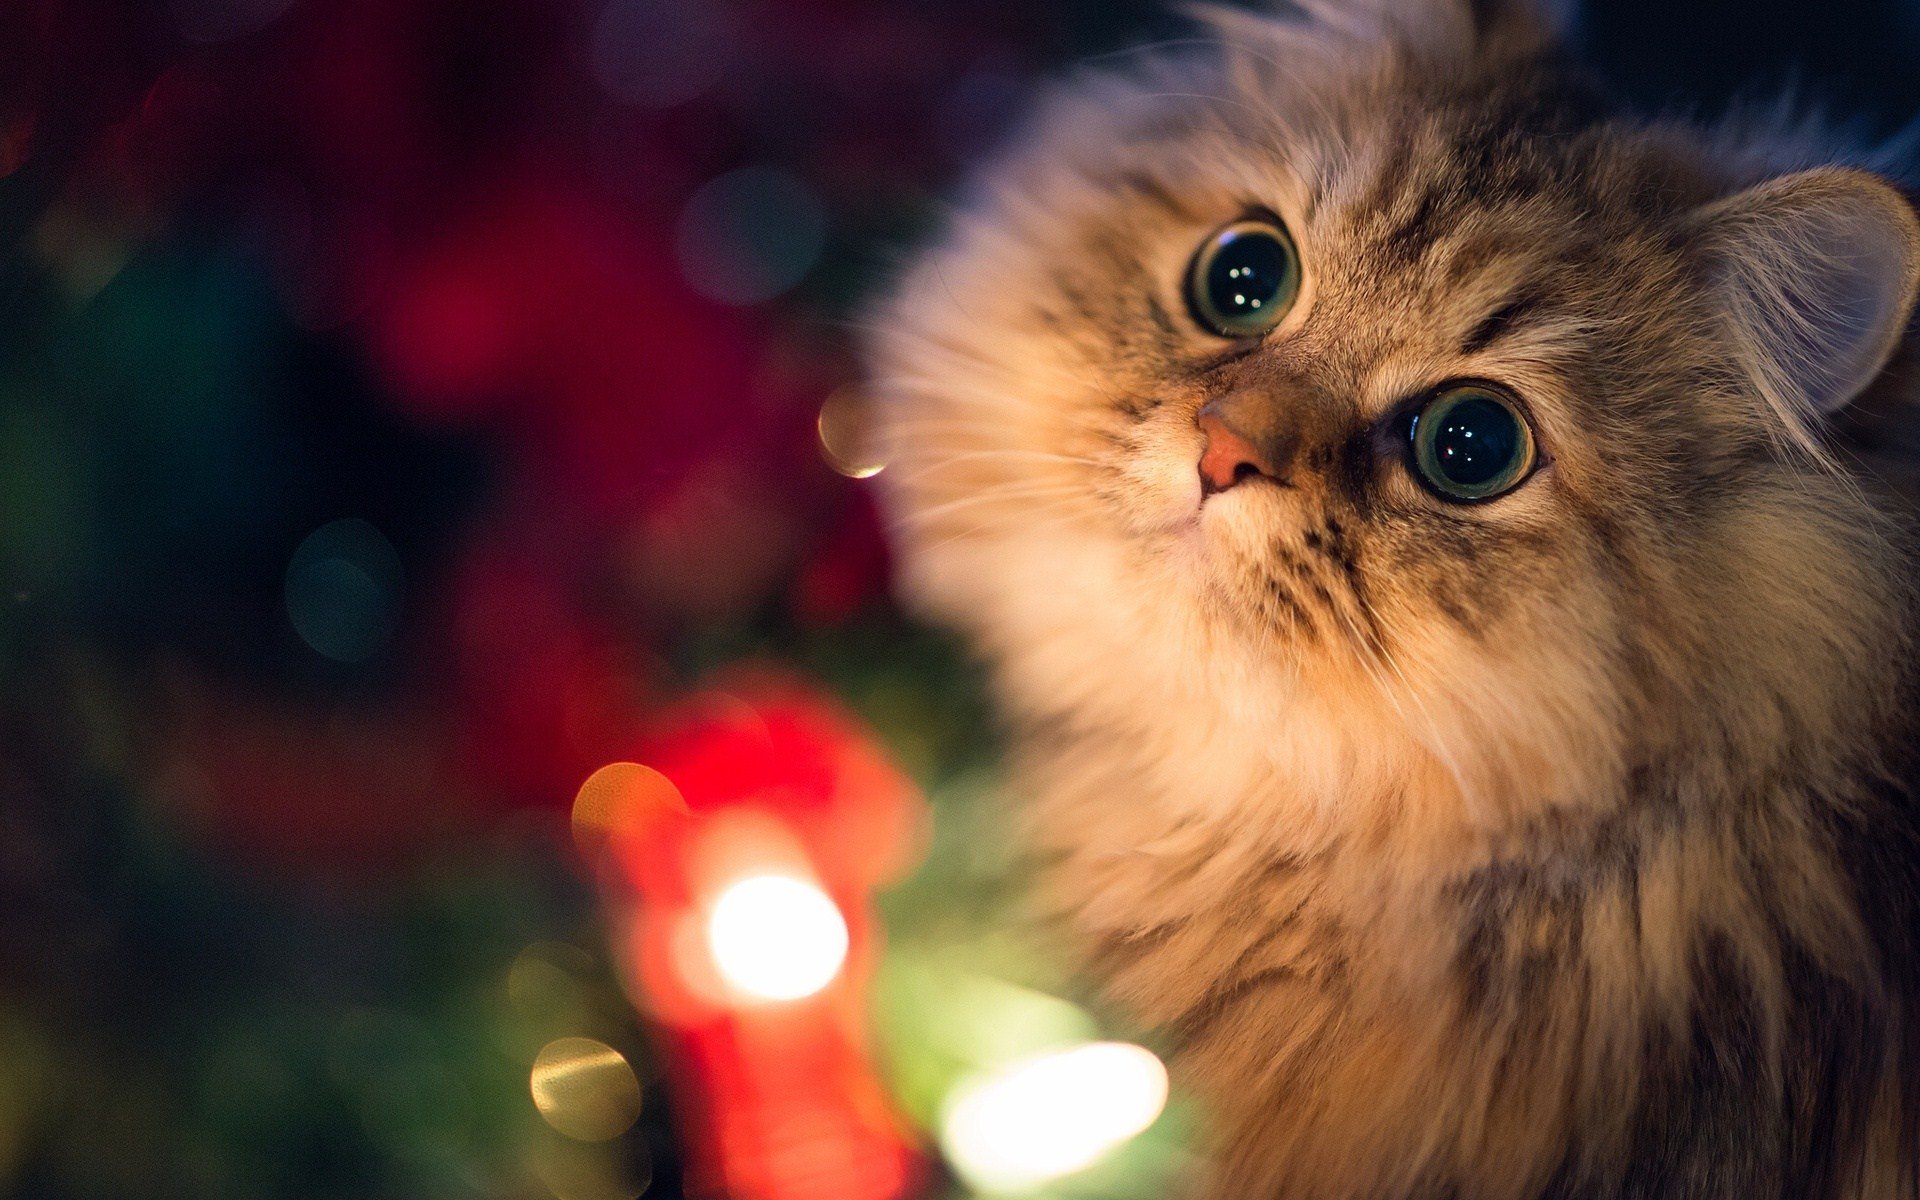 Awesome Cat Close Up wallpaper 1920x1200 11448